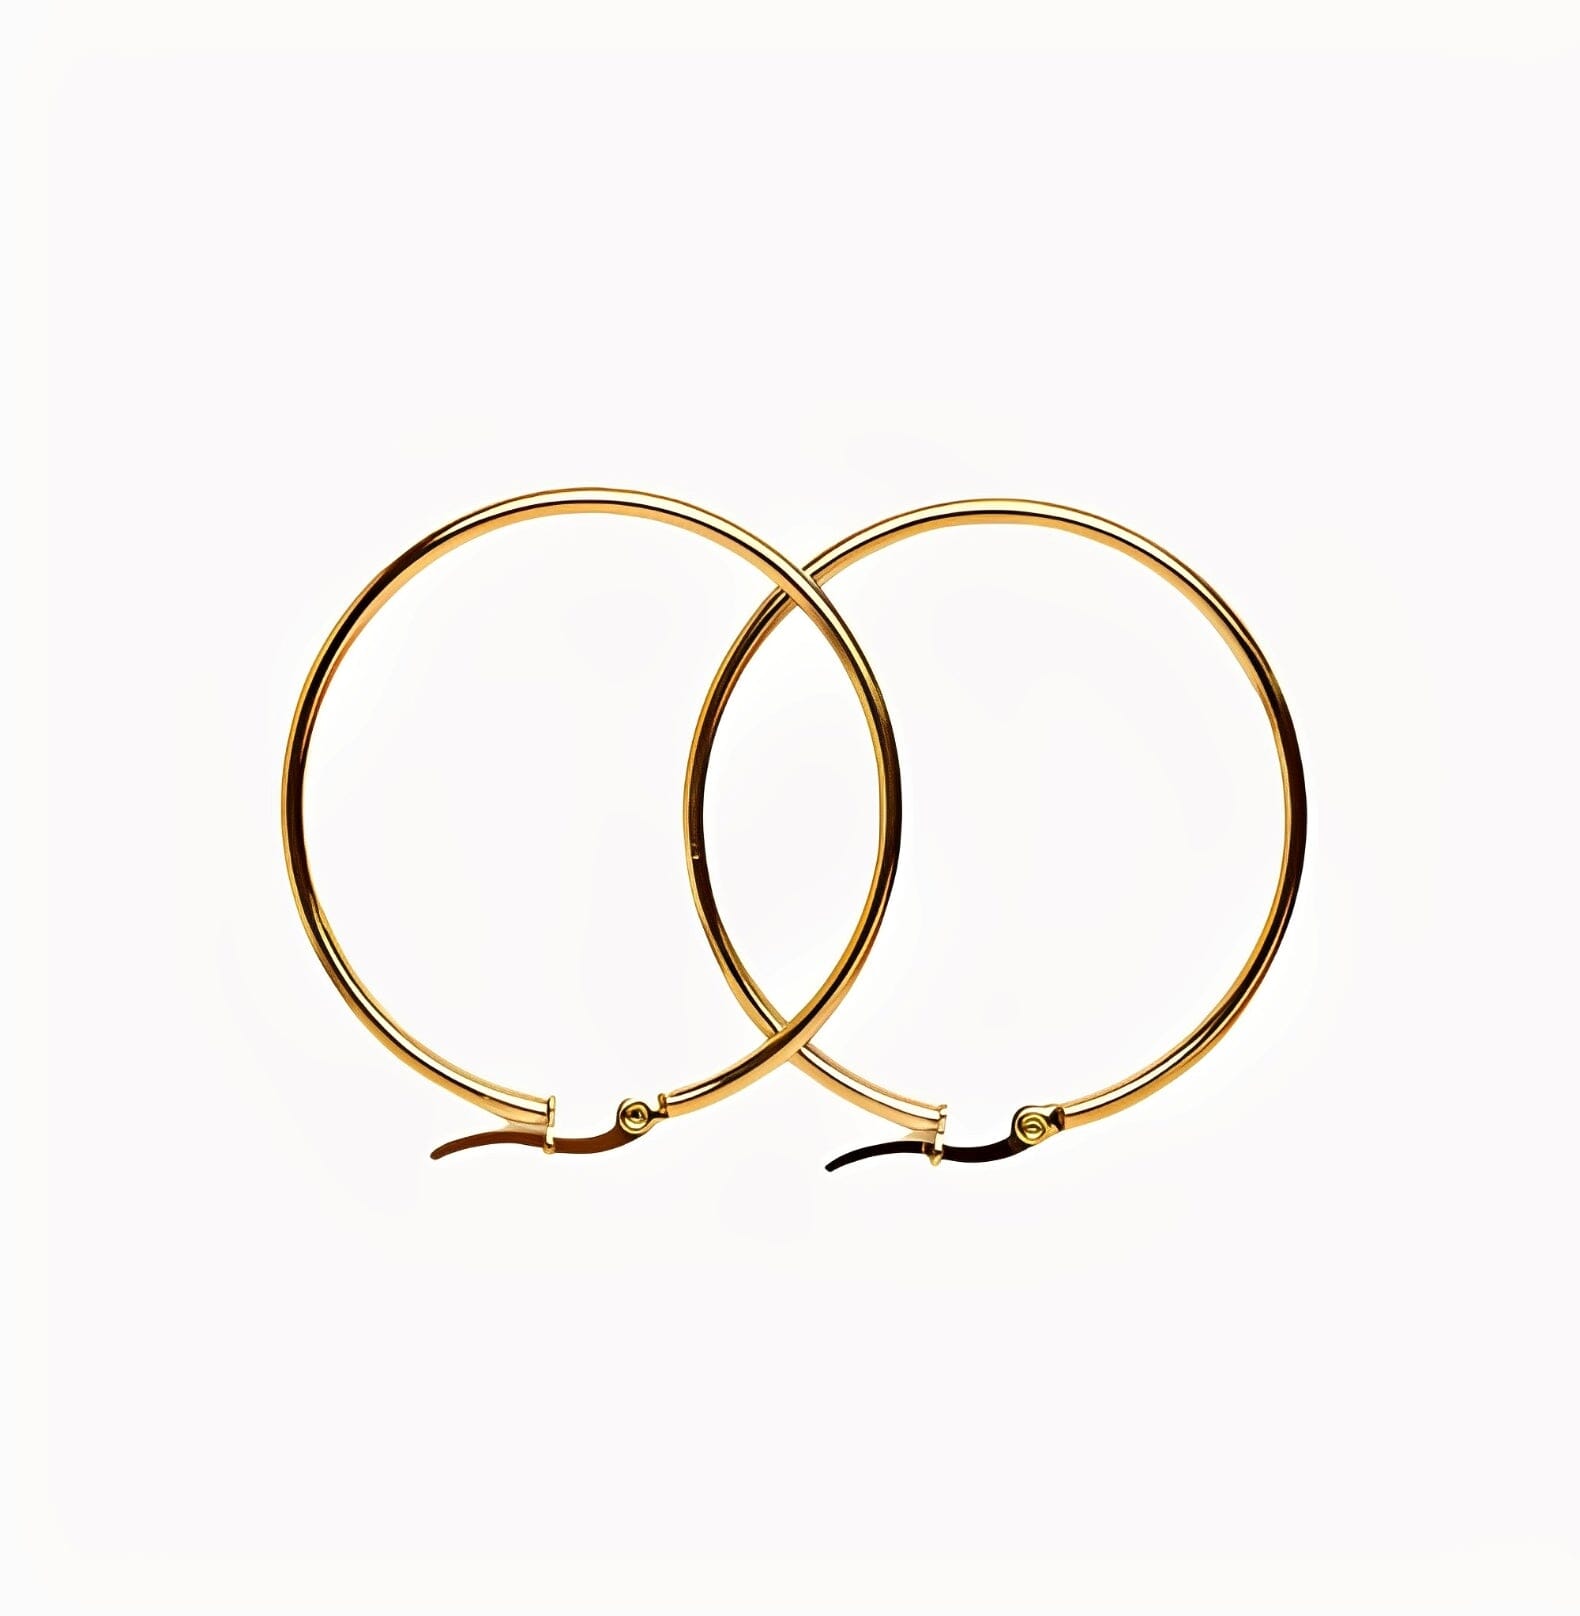 LARGE HOOP EARRINGS braclet Yubama Jewelry Online Store - The Elegant Designs of Gold and Silver ! 50mm 